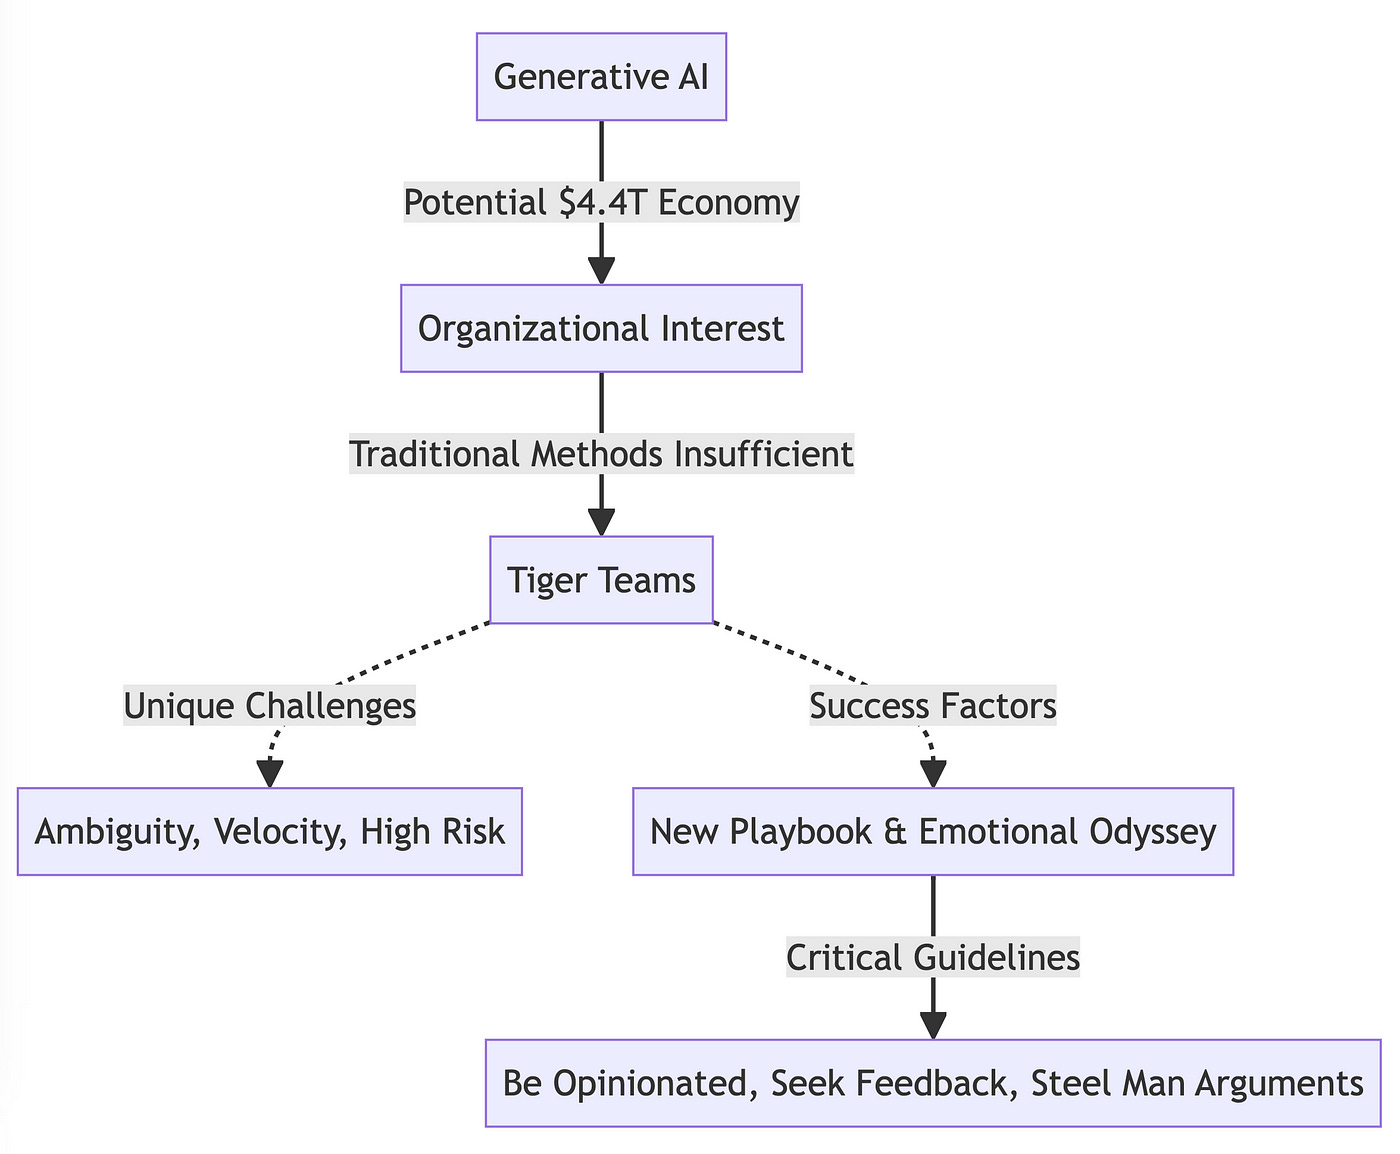 Visualizing the Fast-Paced, High-Stakes Journey of Leading a Tiger Team in the Generative AI Landscape.